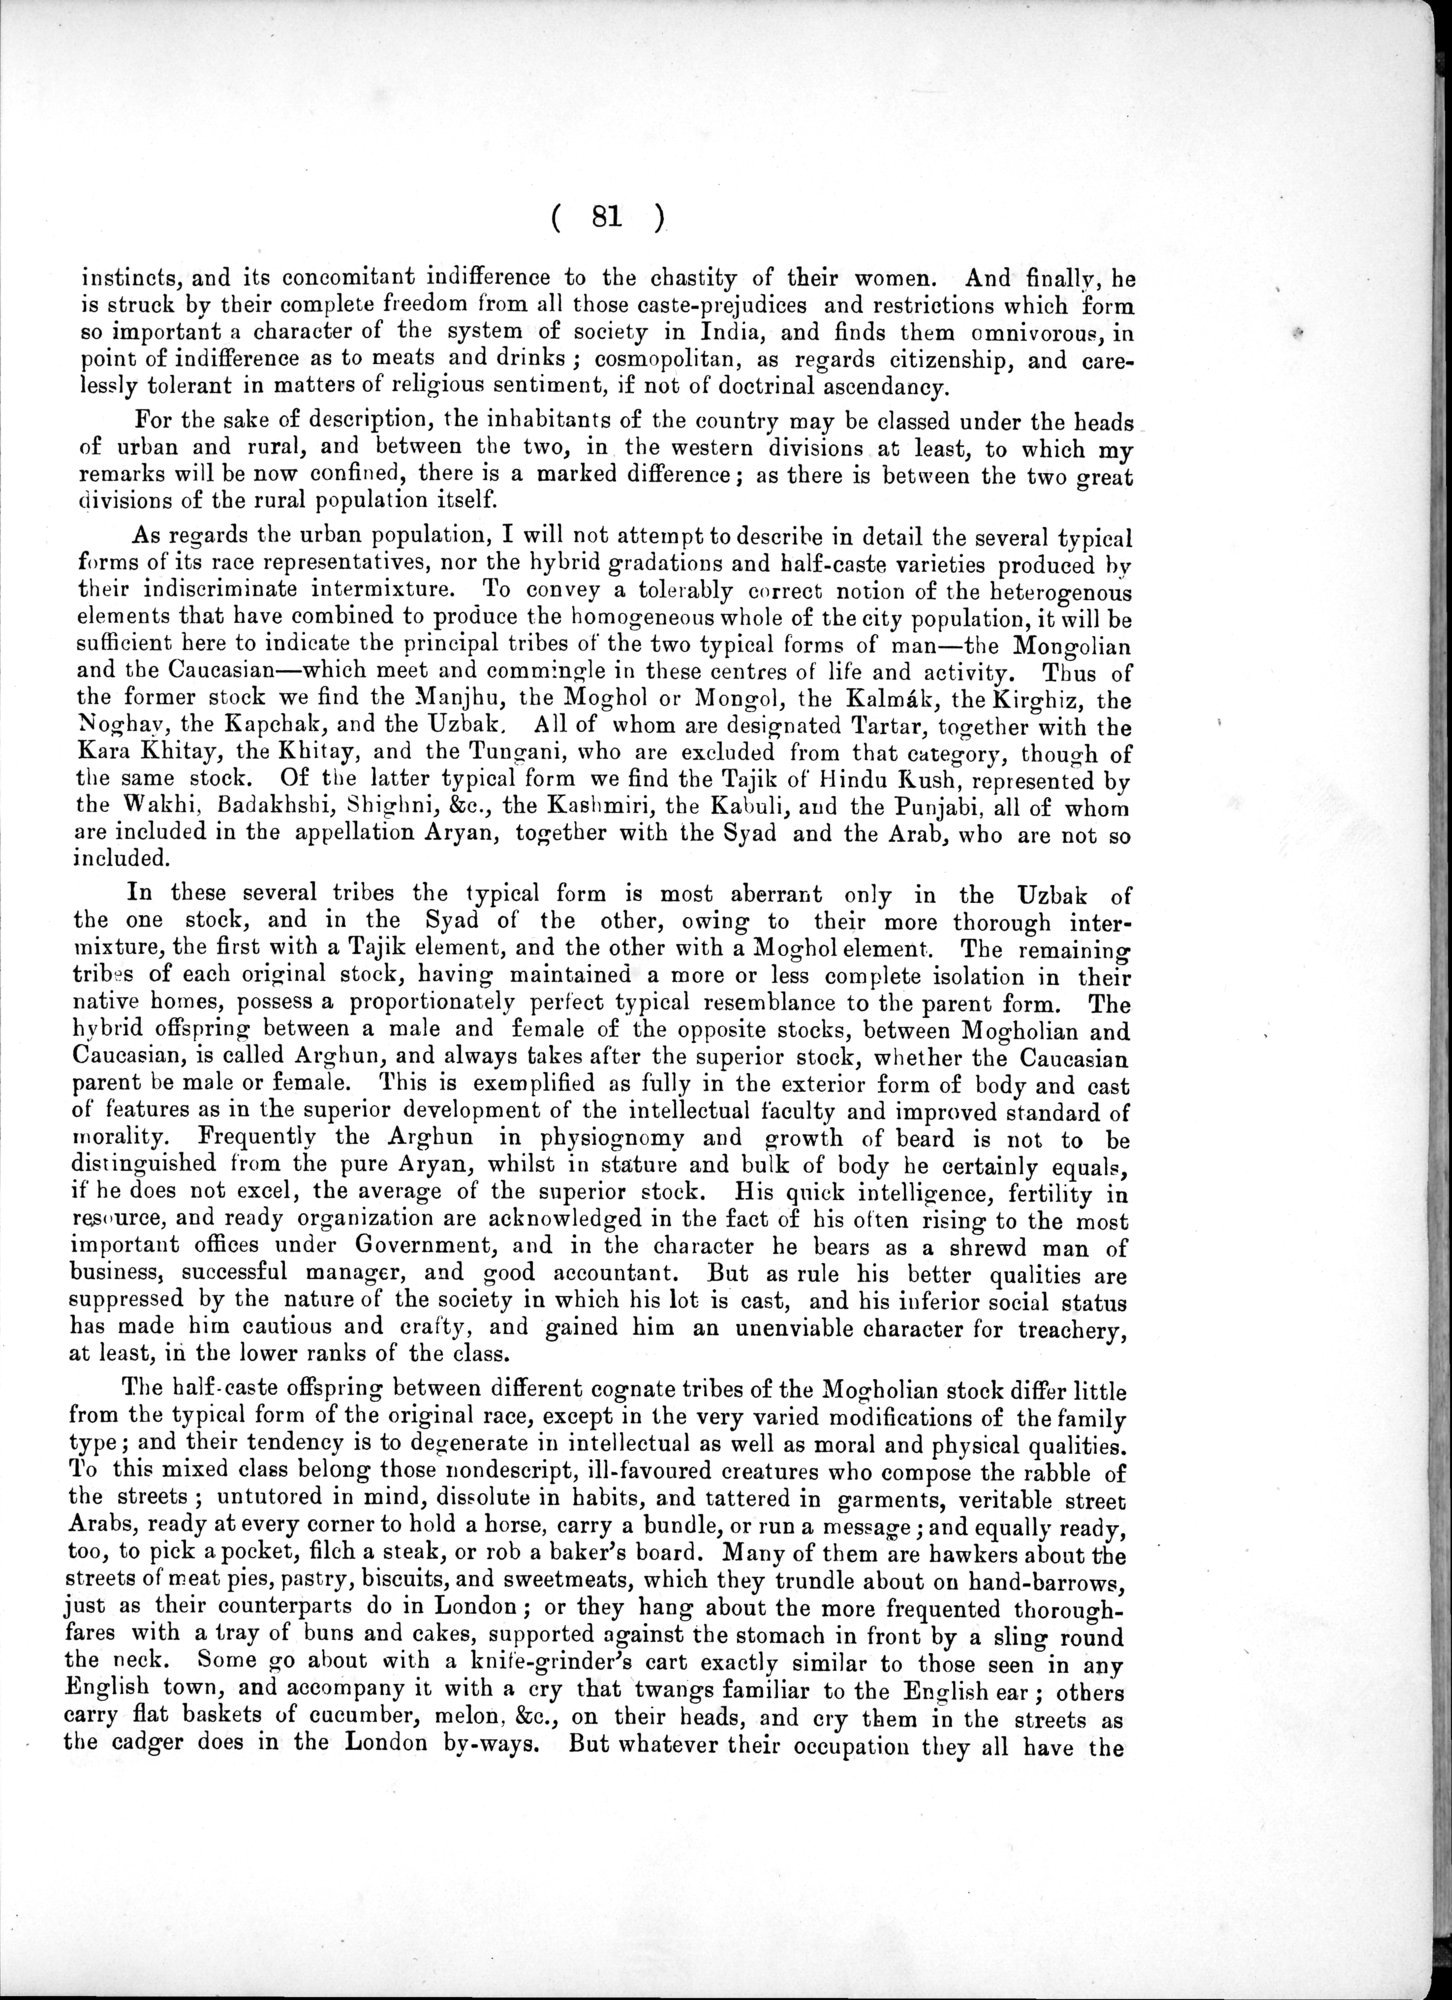 Report of a Mission to Yarkund in 1873 : vol.1 / Page 129 (Grayscale High Resolution Image)